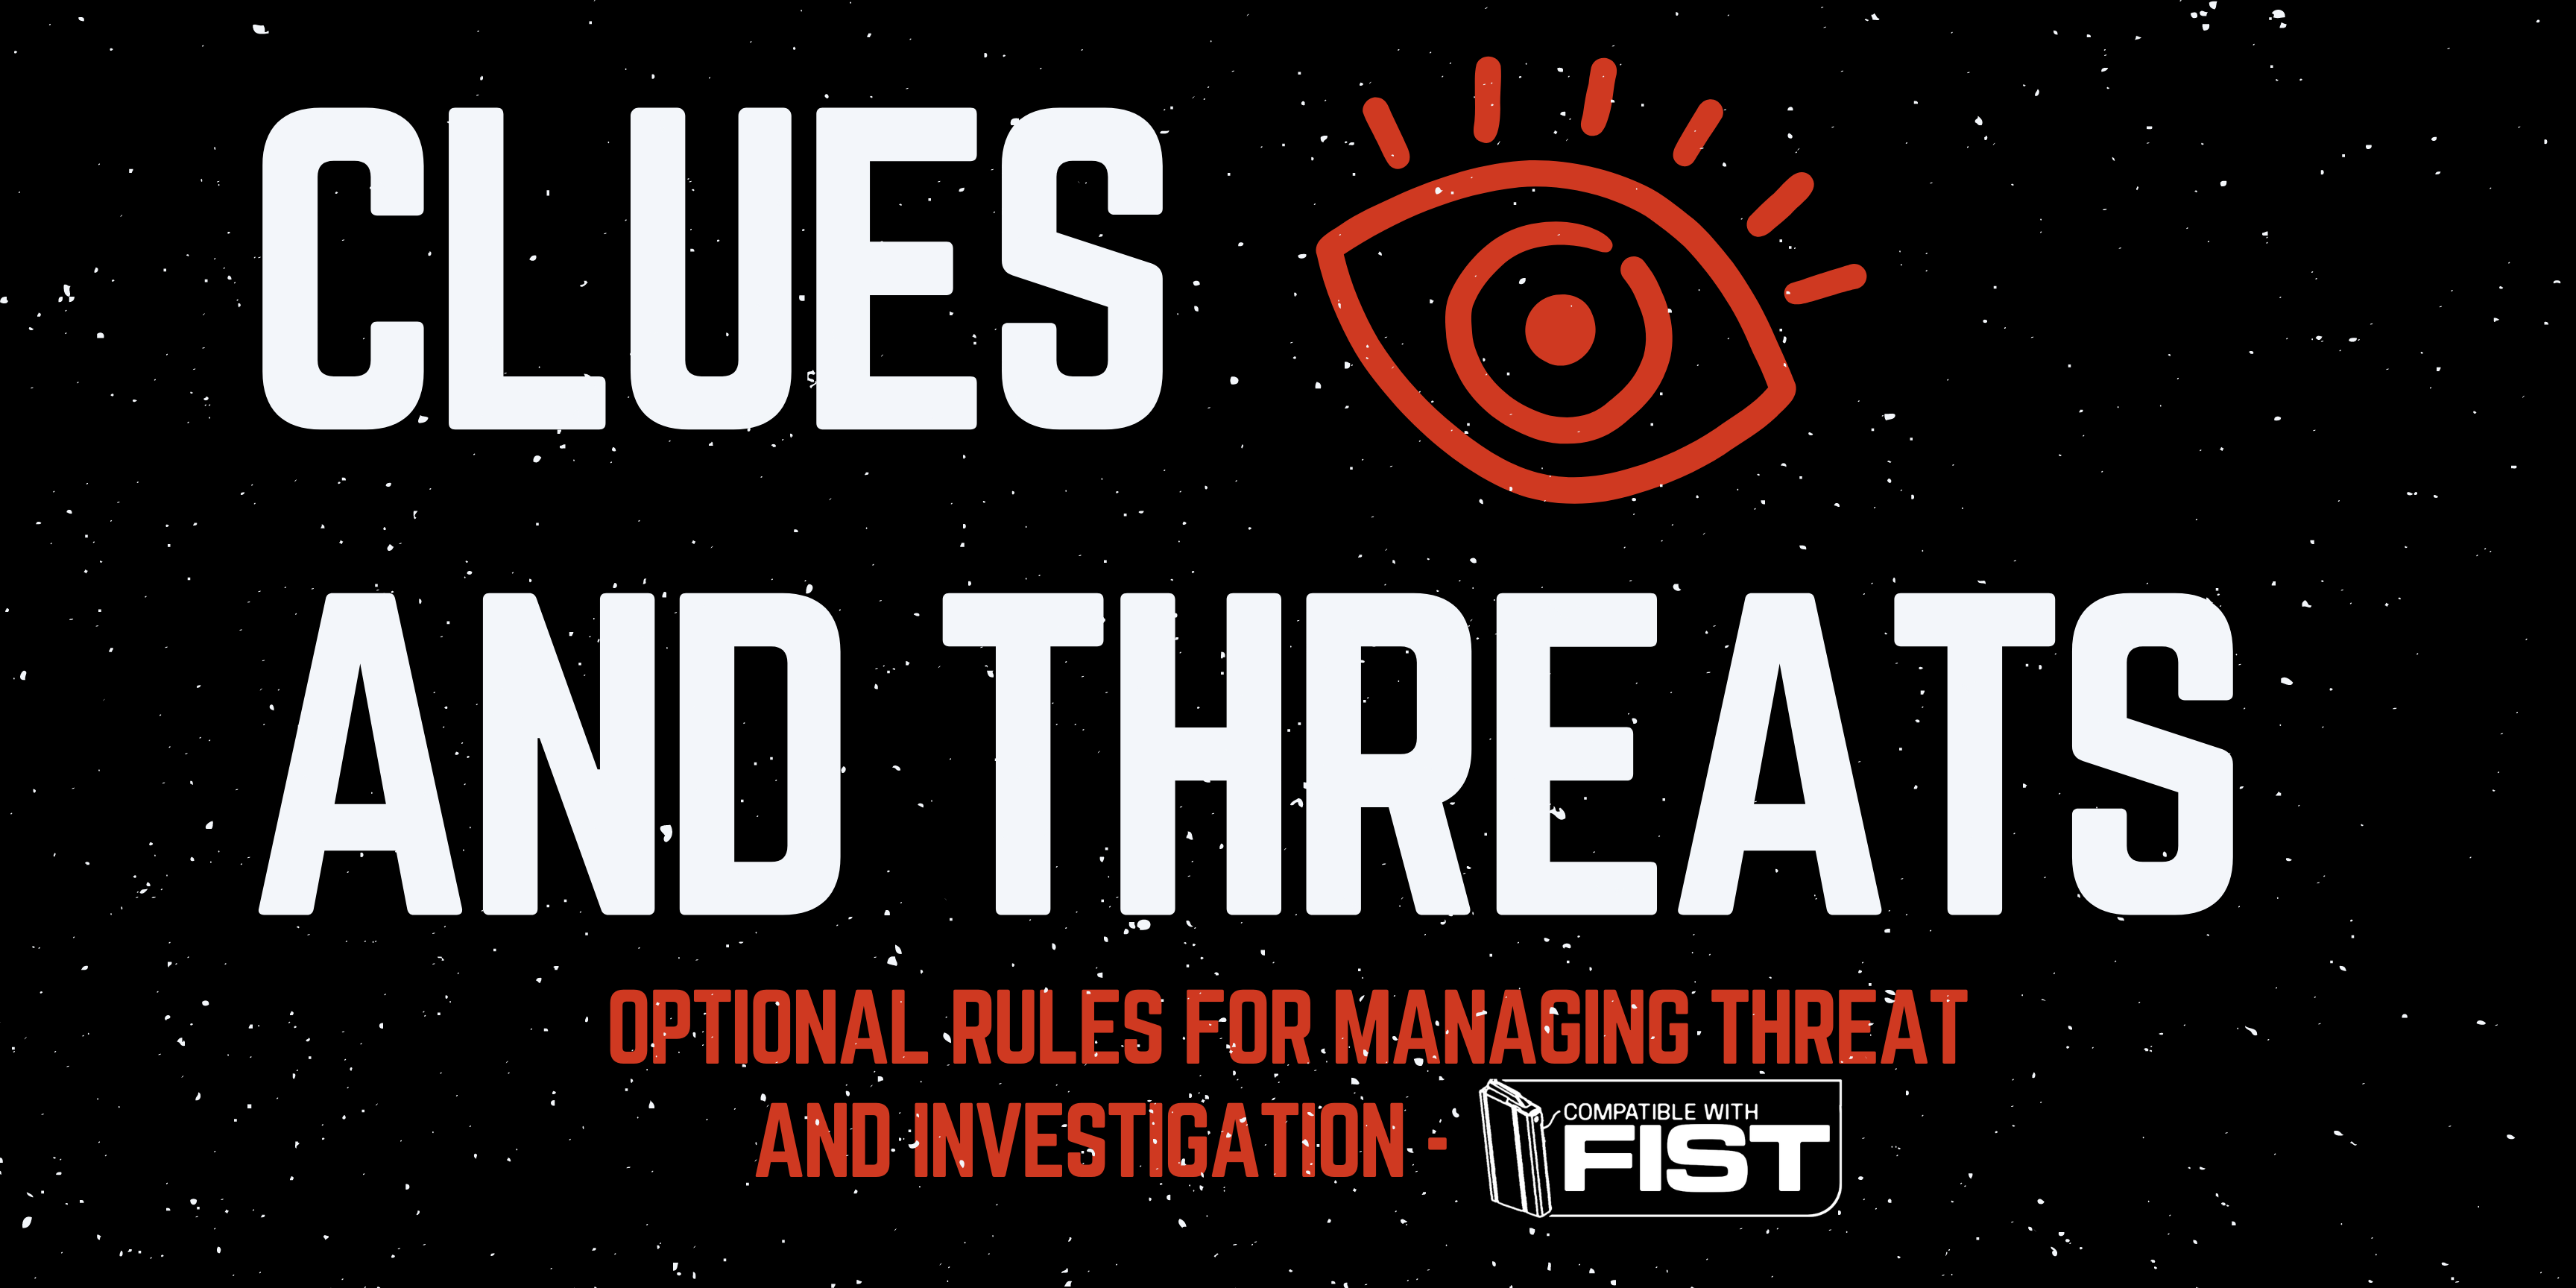 Clues and Threats - Optional rules for Managing threat and investigation (F.I.S.T.)